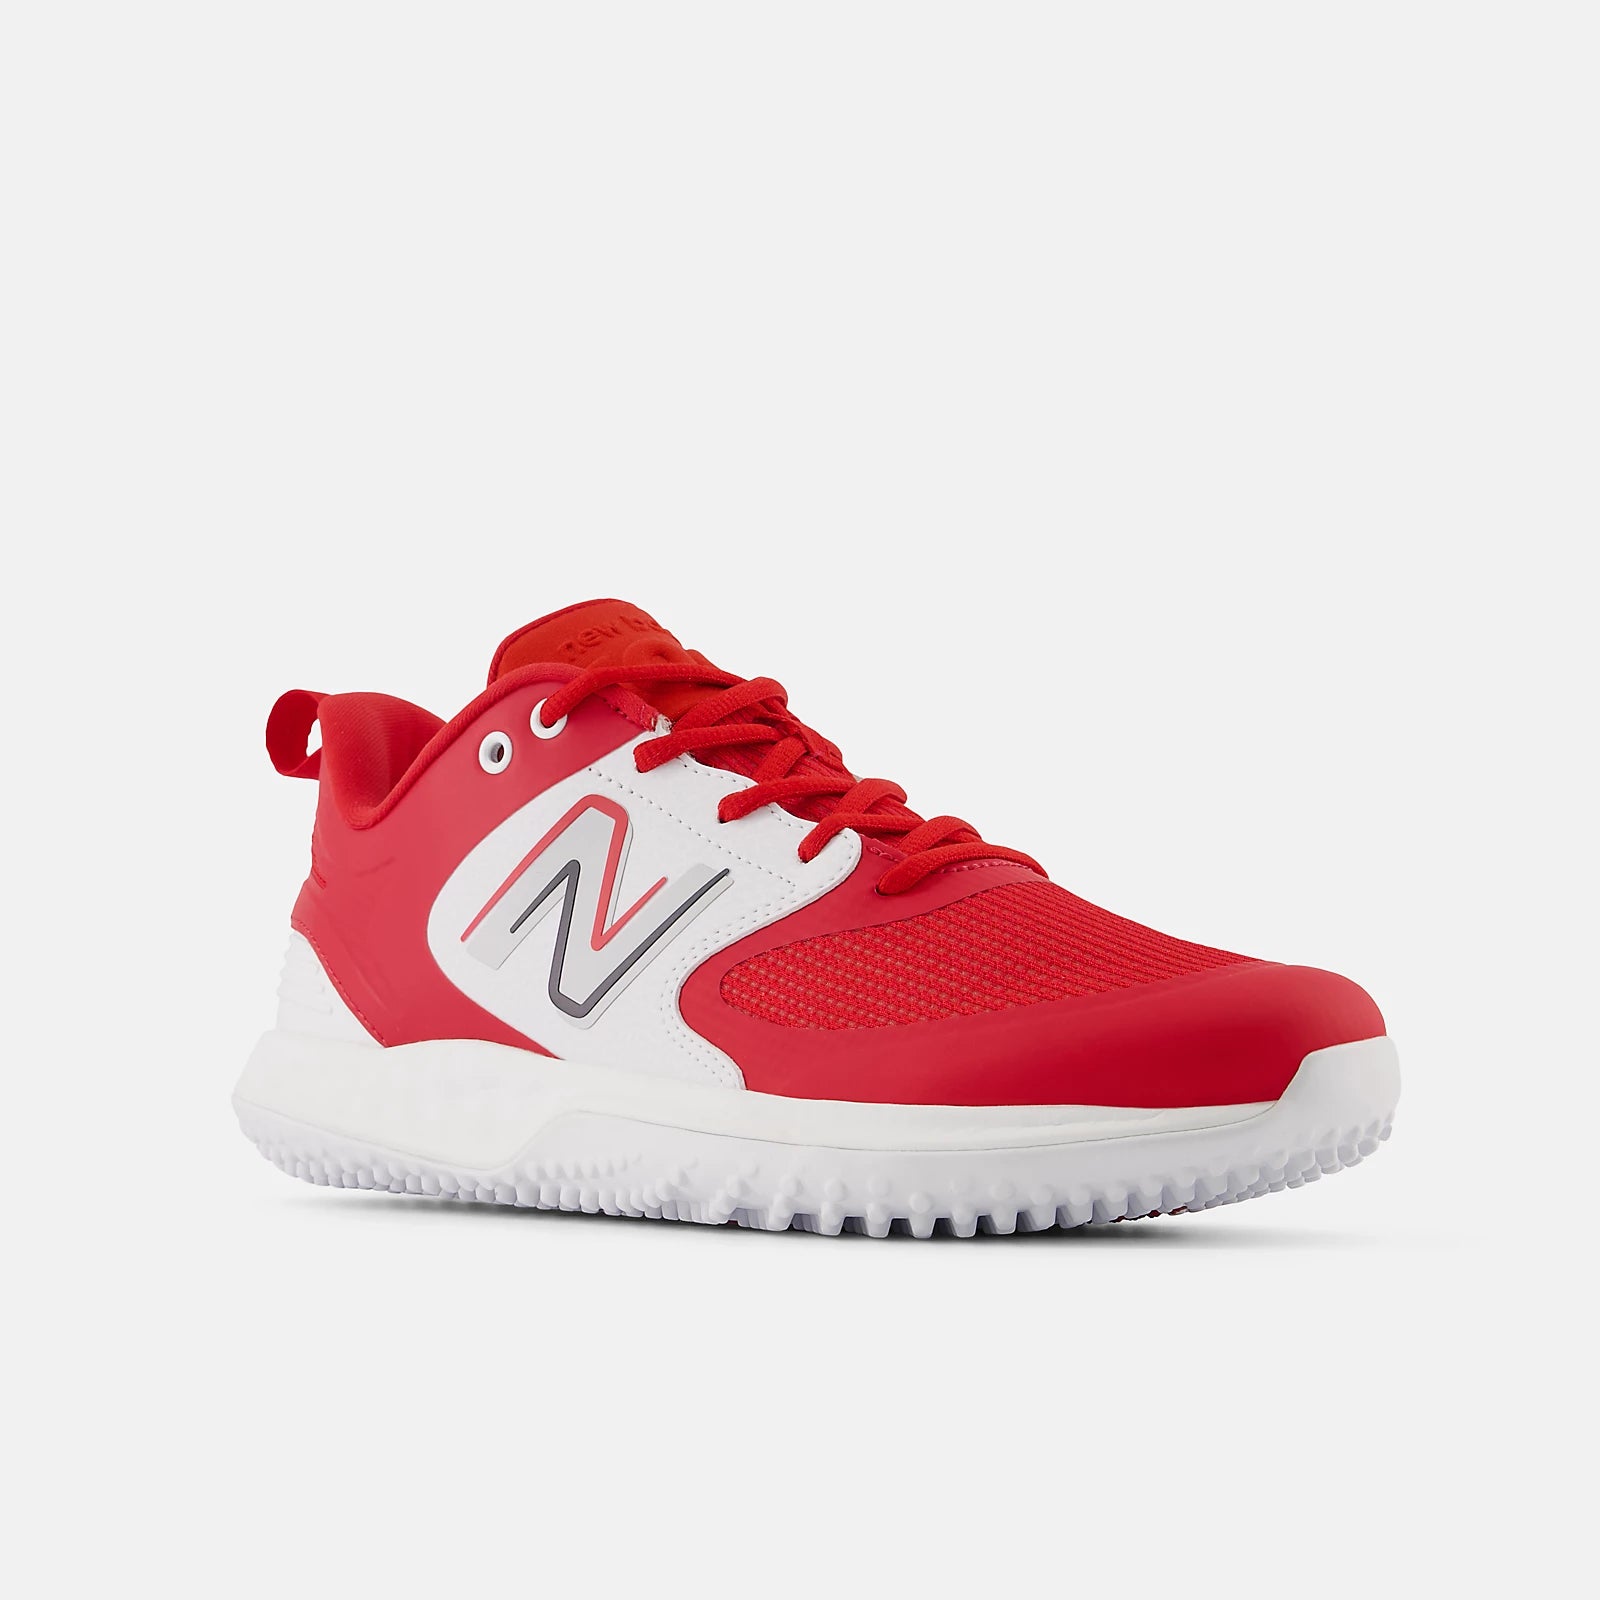 New Balance Red T3000v6 Turf Shoes